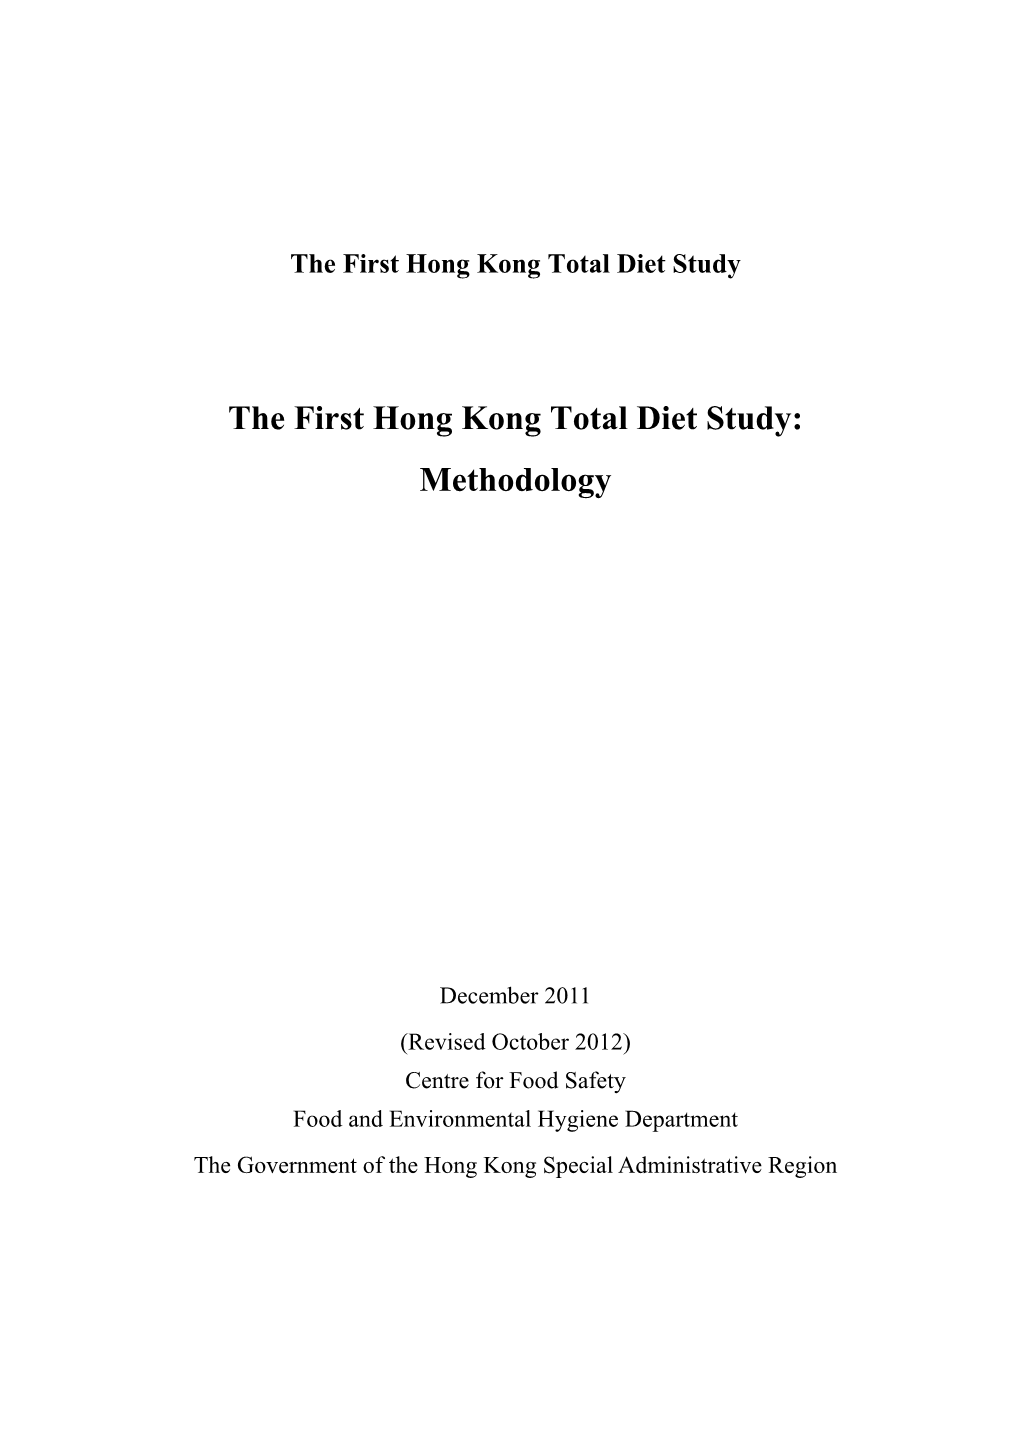 The First Hong Kong Total Diet Study: Methodology